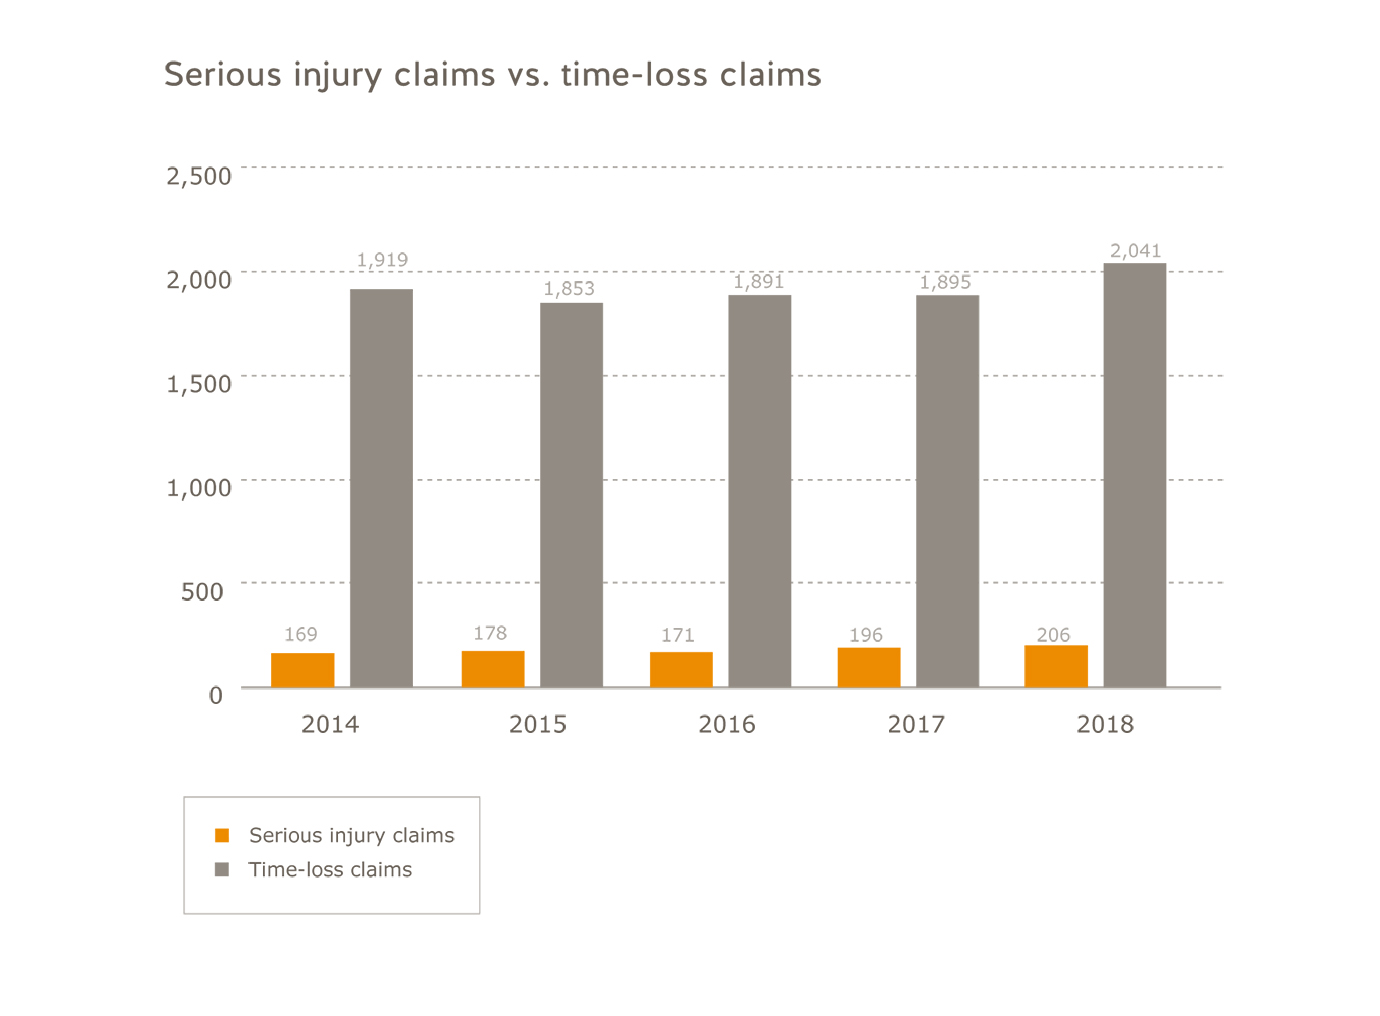 Municipalities industry serious injury claims vs. time-loss claims for 2014 to 2018. Serious injury claims: 2014=169; 2015=178; 2016=171; 2017=196; 2018=206. Time-loss claims: 2014=1,919; 2015=1,853, 2016=1,891, 2017=1,895, 2018=2,041